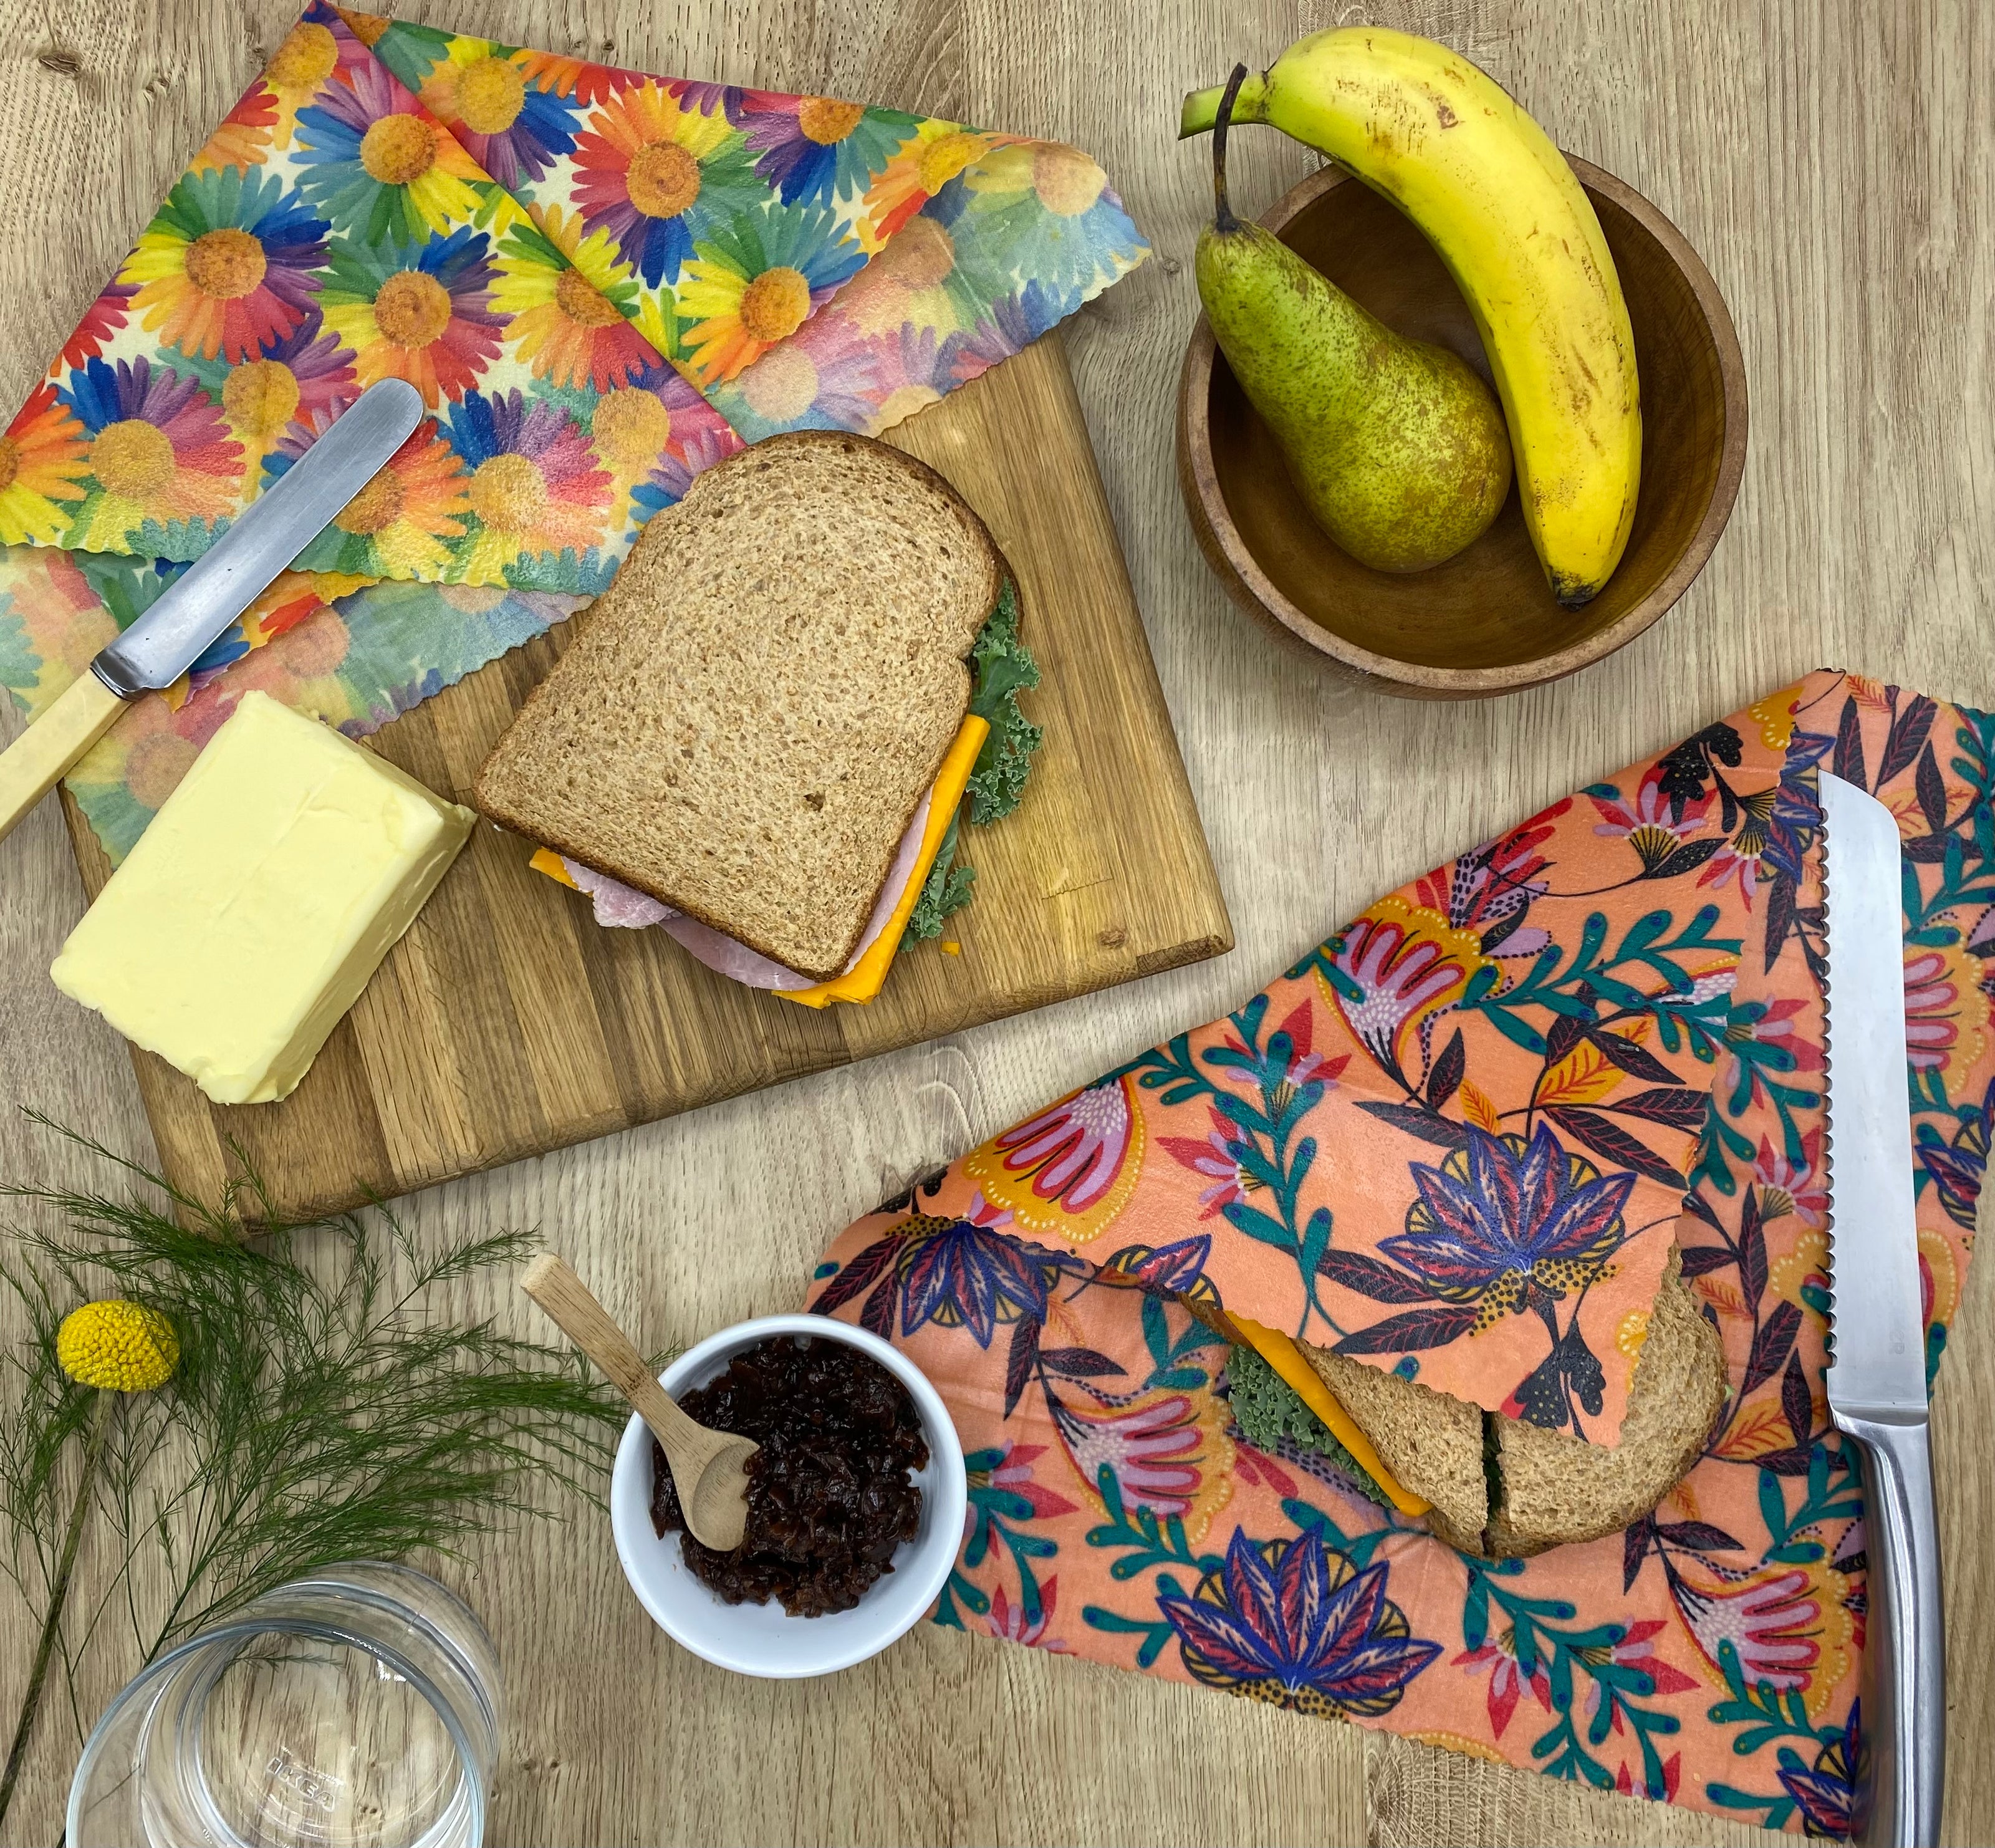 Sandwich Wrapped in Handmade Beeswax Wraps